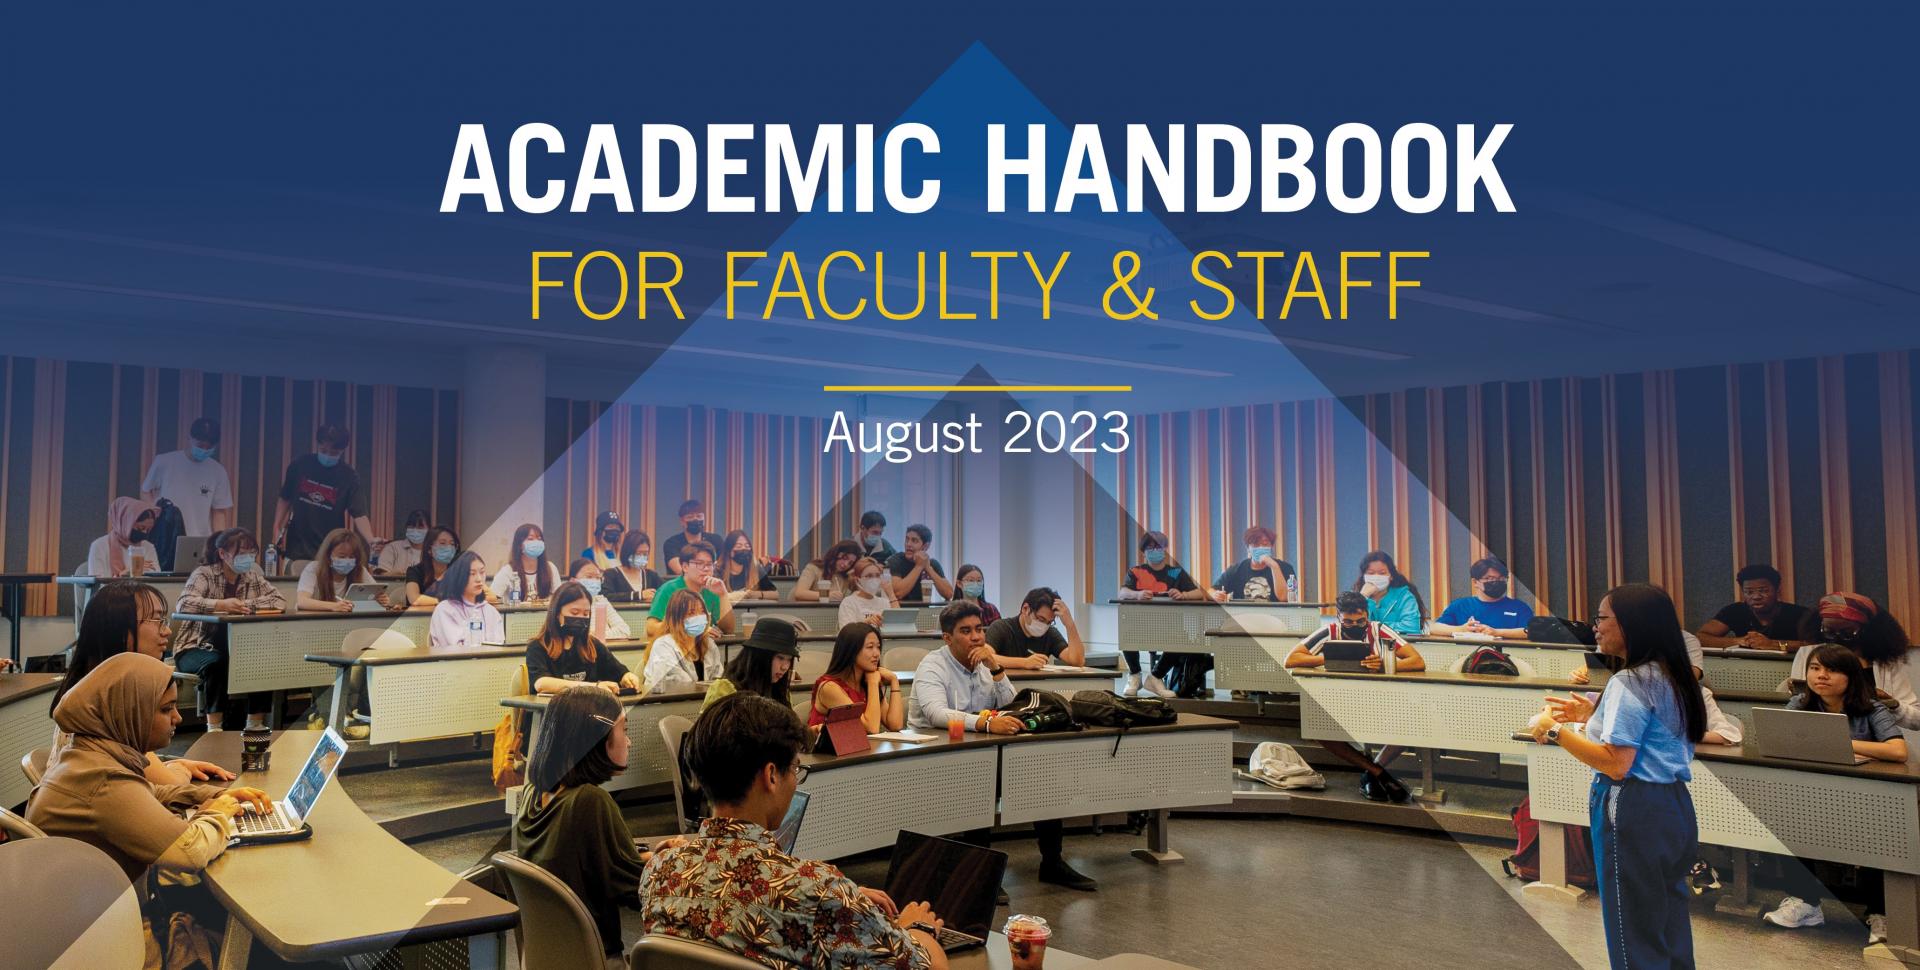 A cover image for the Academic Handbook, featuring a person lecturing to a group of students in a UTSC classroom.